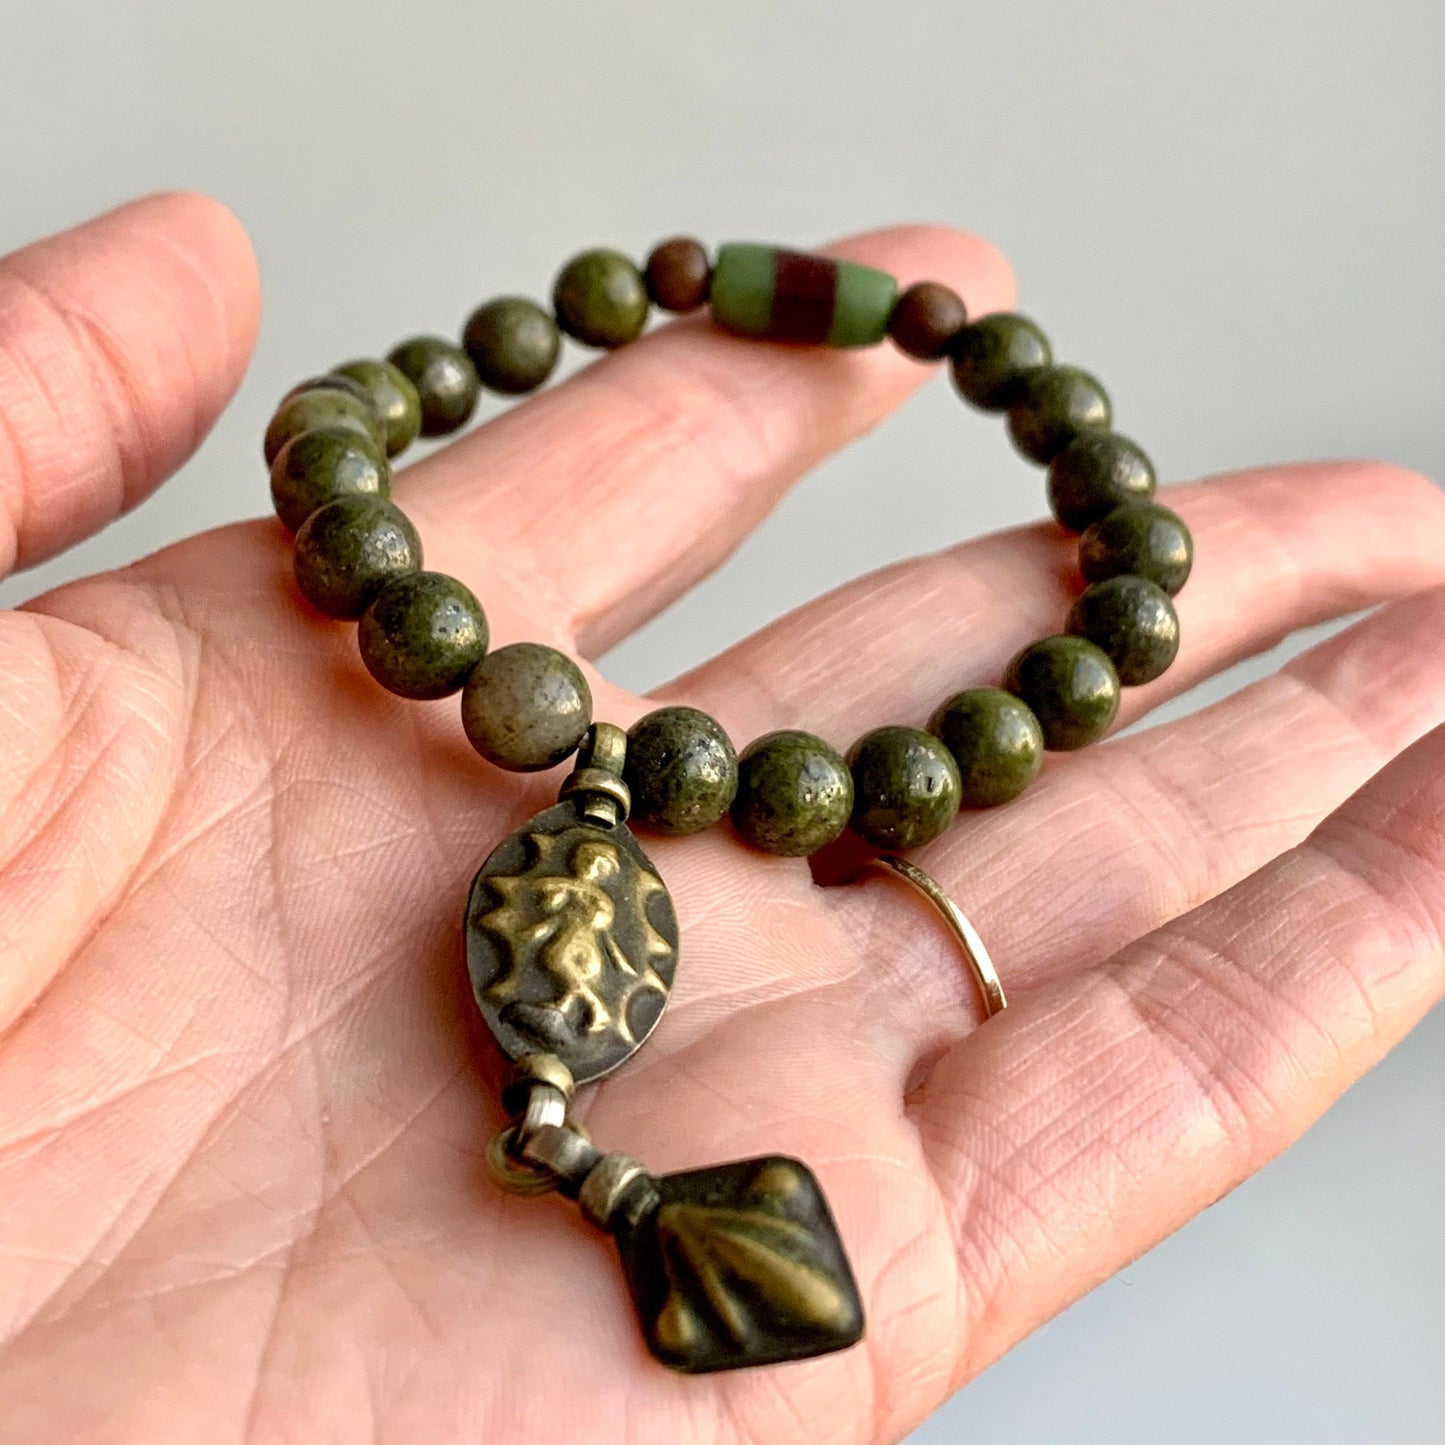 Beaded mala bracelet for yoga and meditation - African Jasper beads - gifts for yoga moms - earthy jewelry - boho style